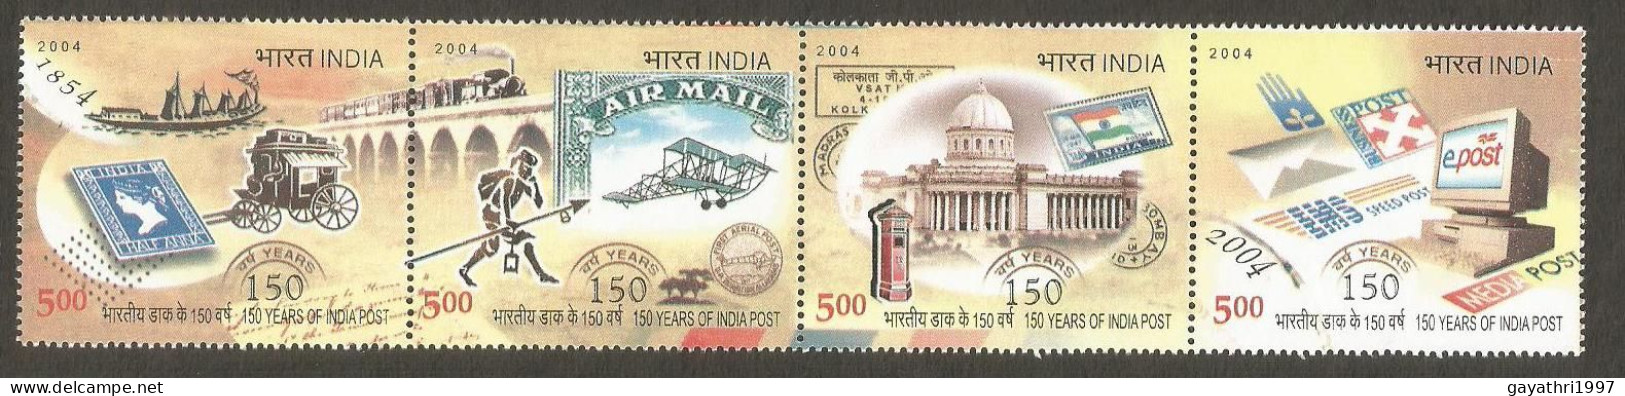 India 2004 150 Years Of Post Se-tenant Mint MNH Good Condition (PST - 83) - Unused Stamps